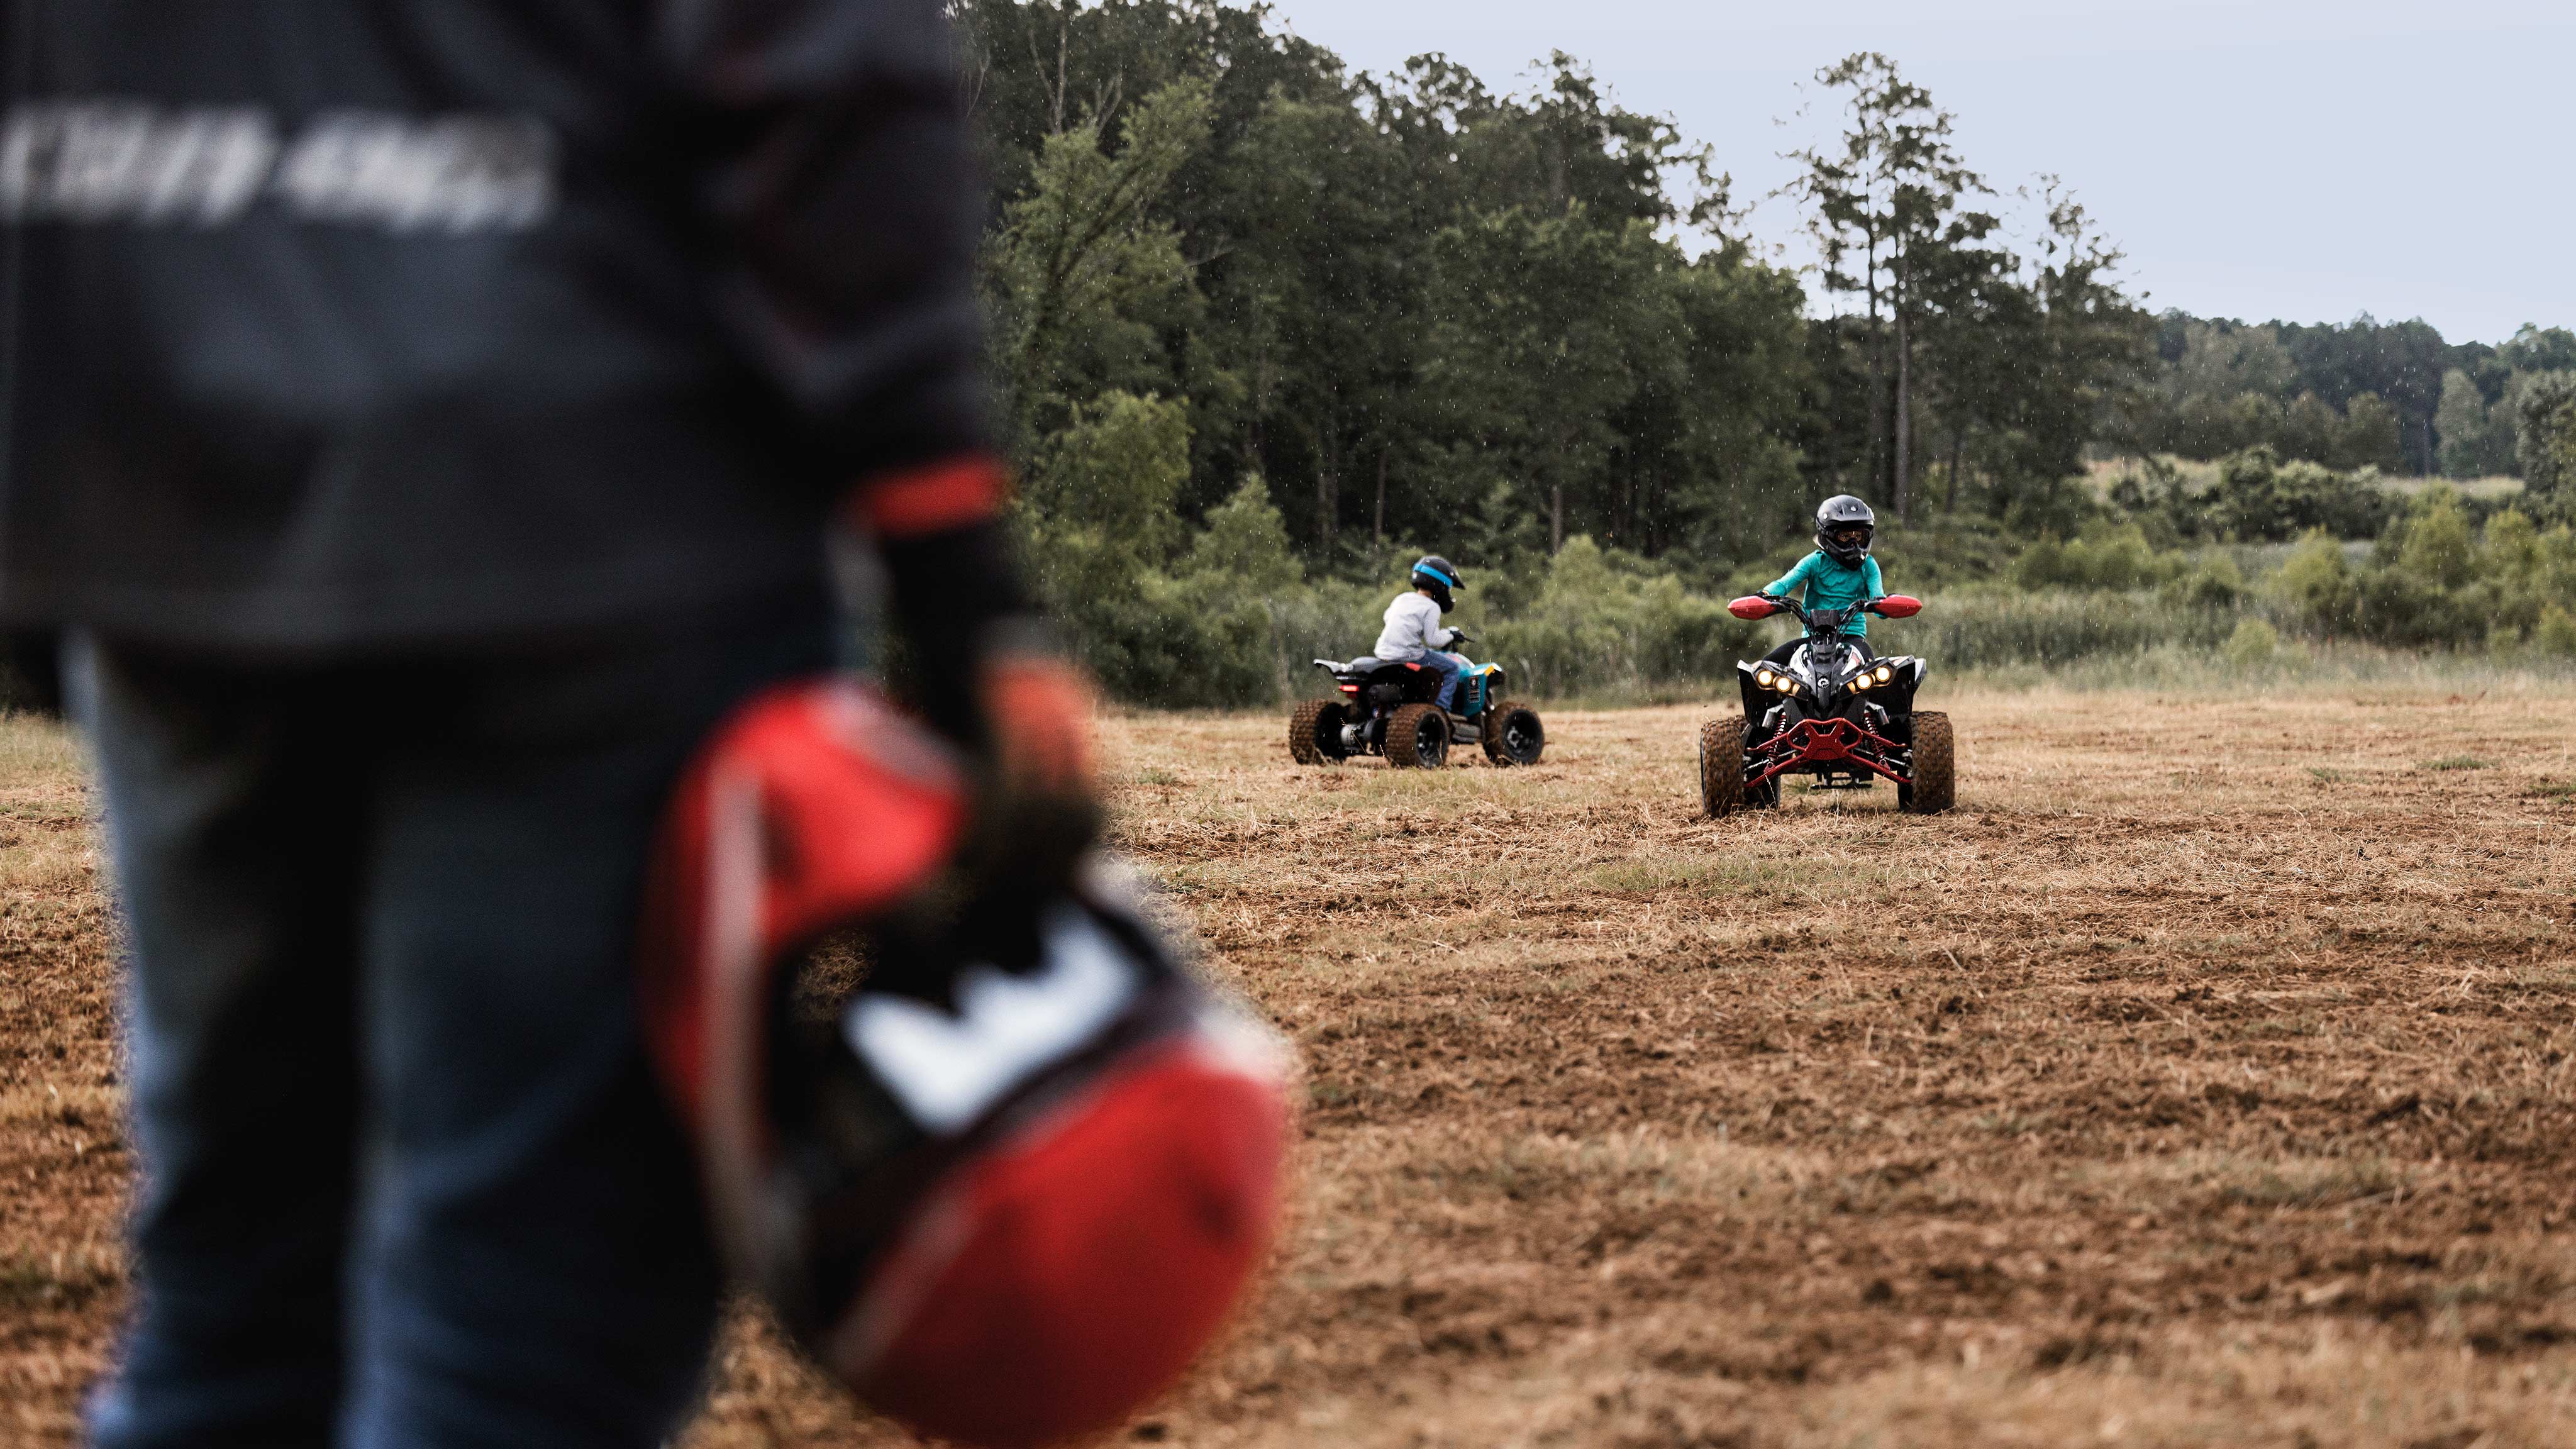 Supervising two young ATV riders